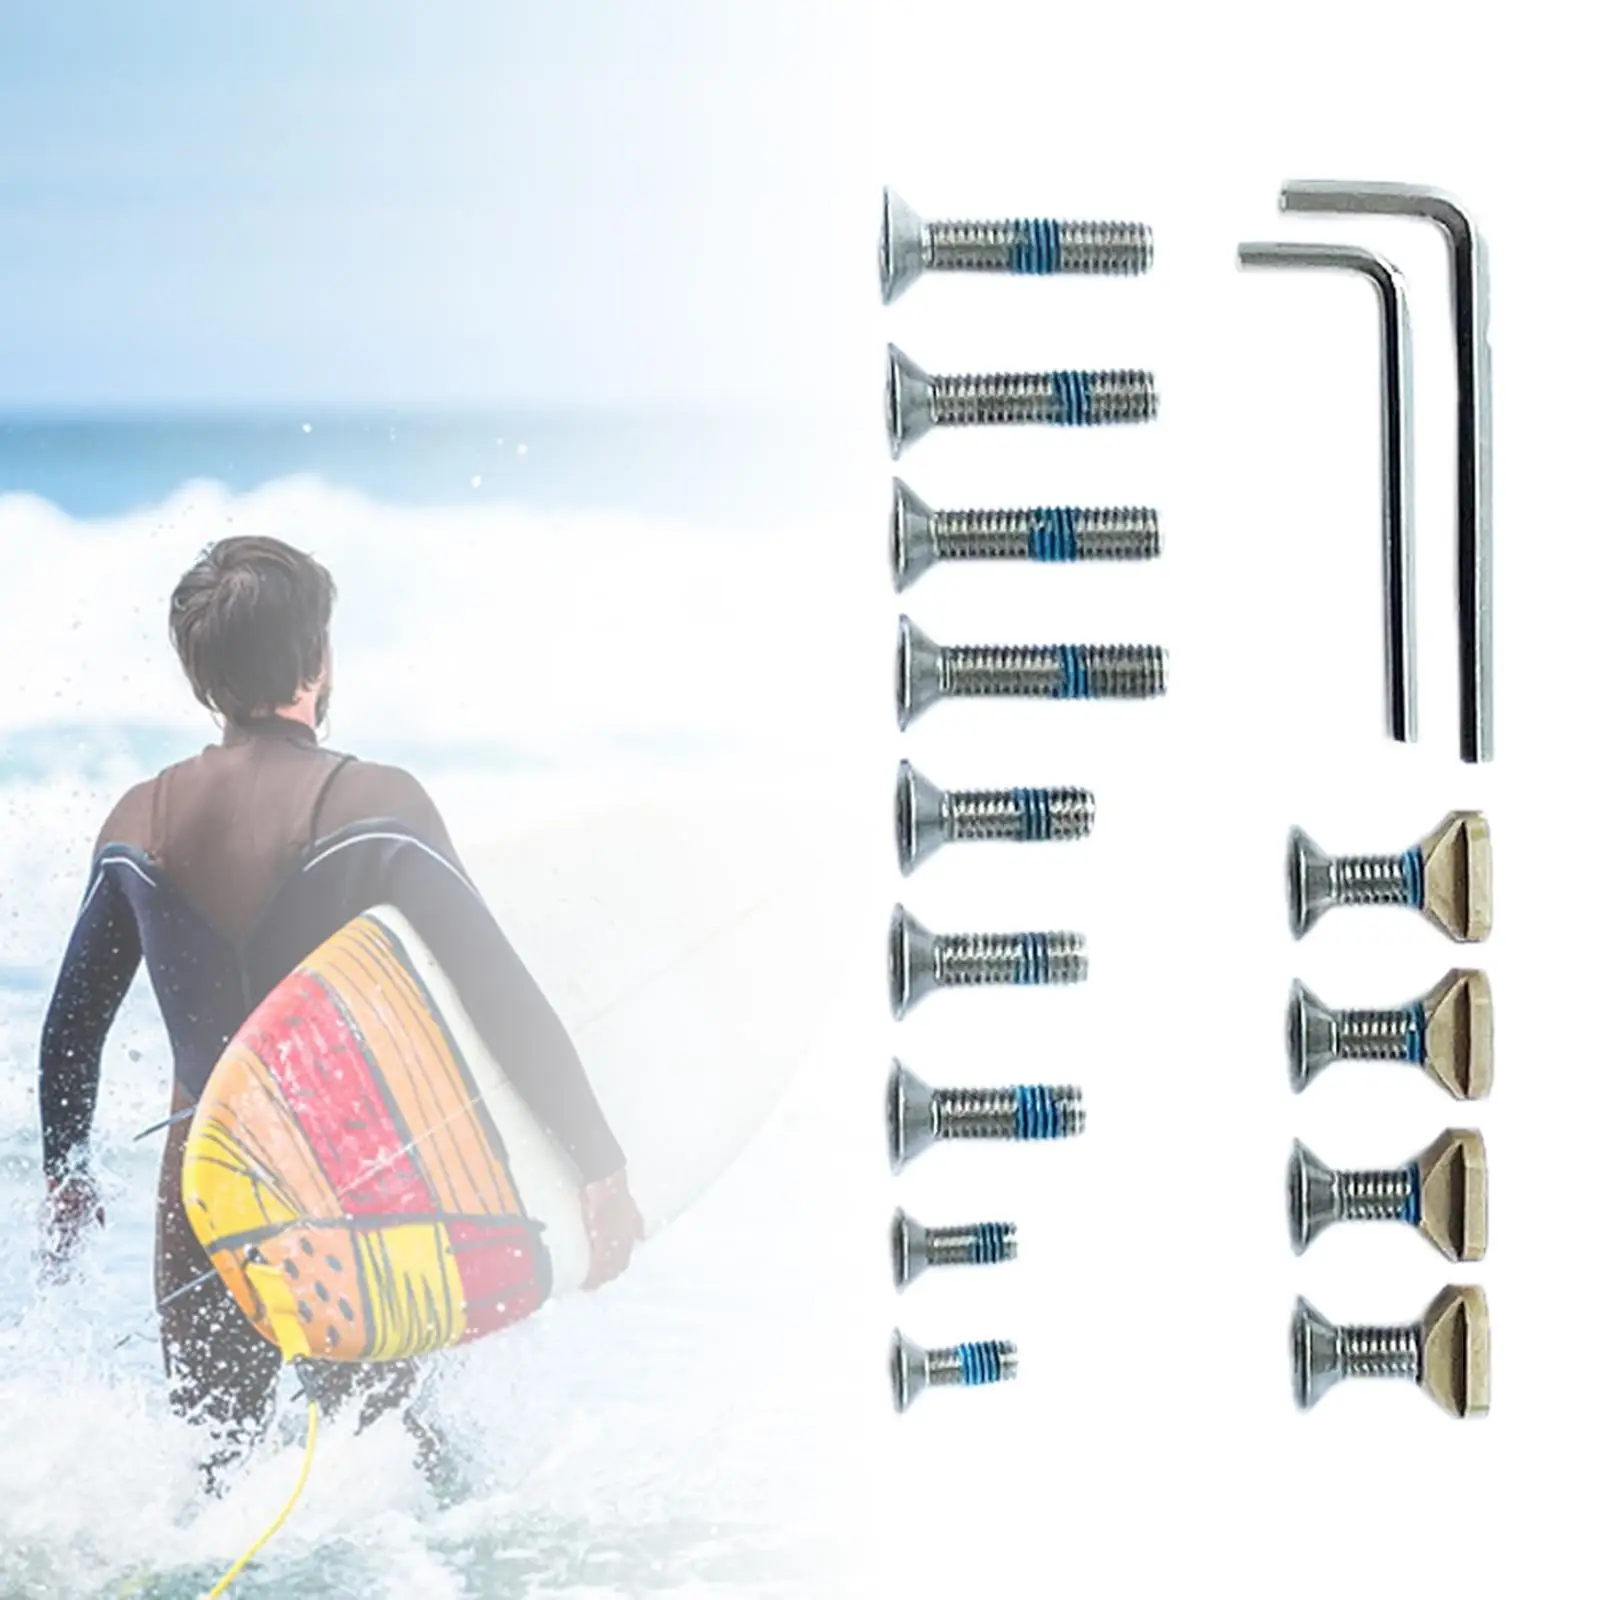 Surfboard Fin Screws Directly Replace High Quality Durable Surfing Accessories Stainless Steel Waterproof for Paddle Board